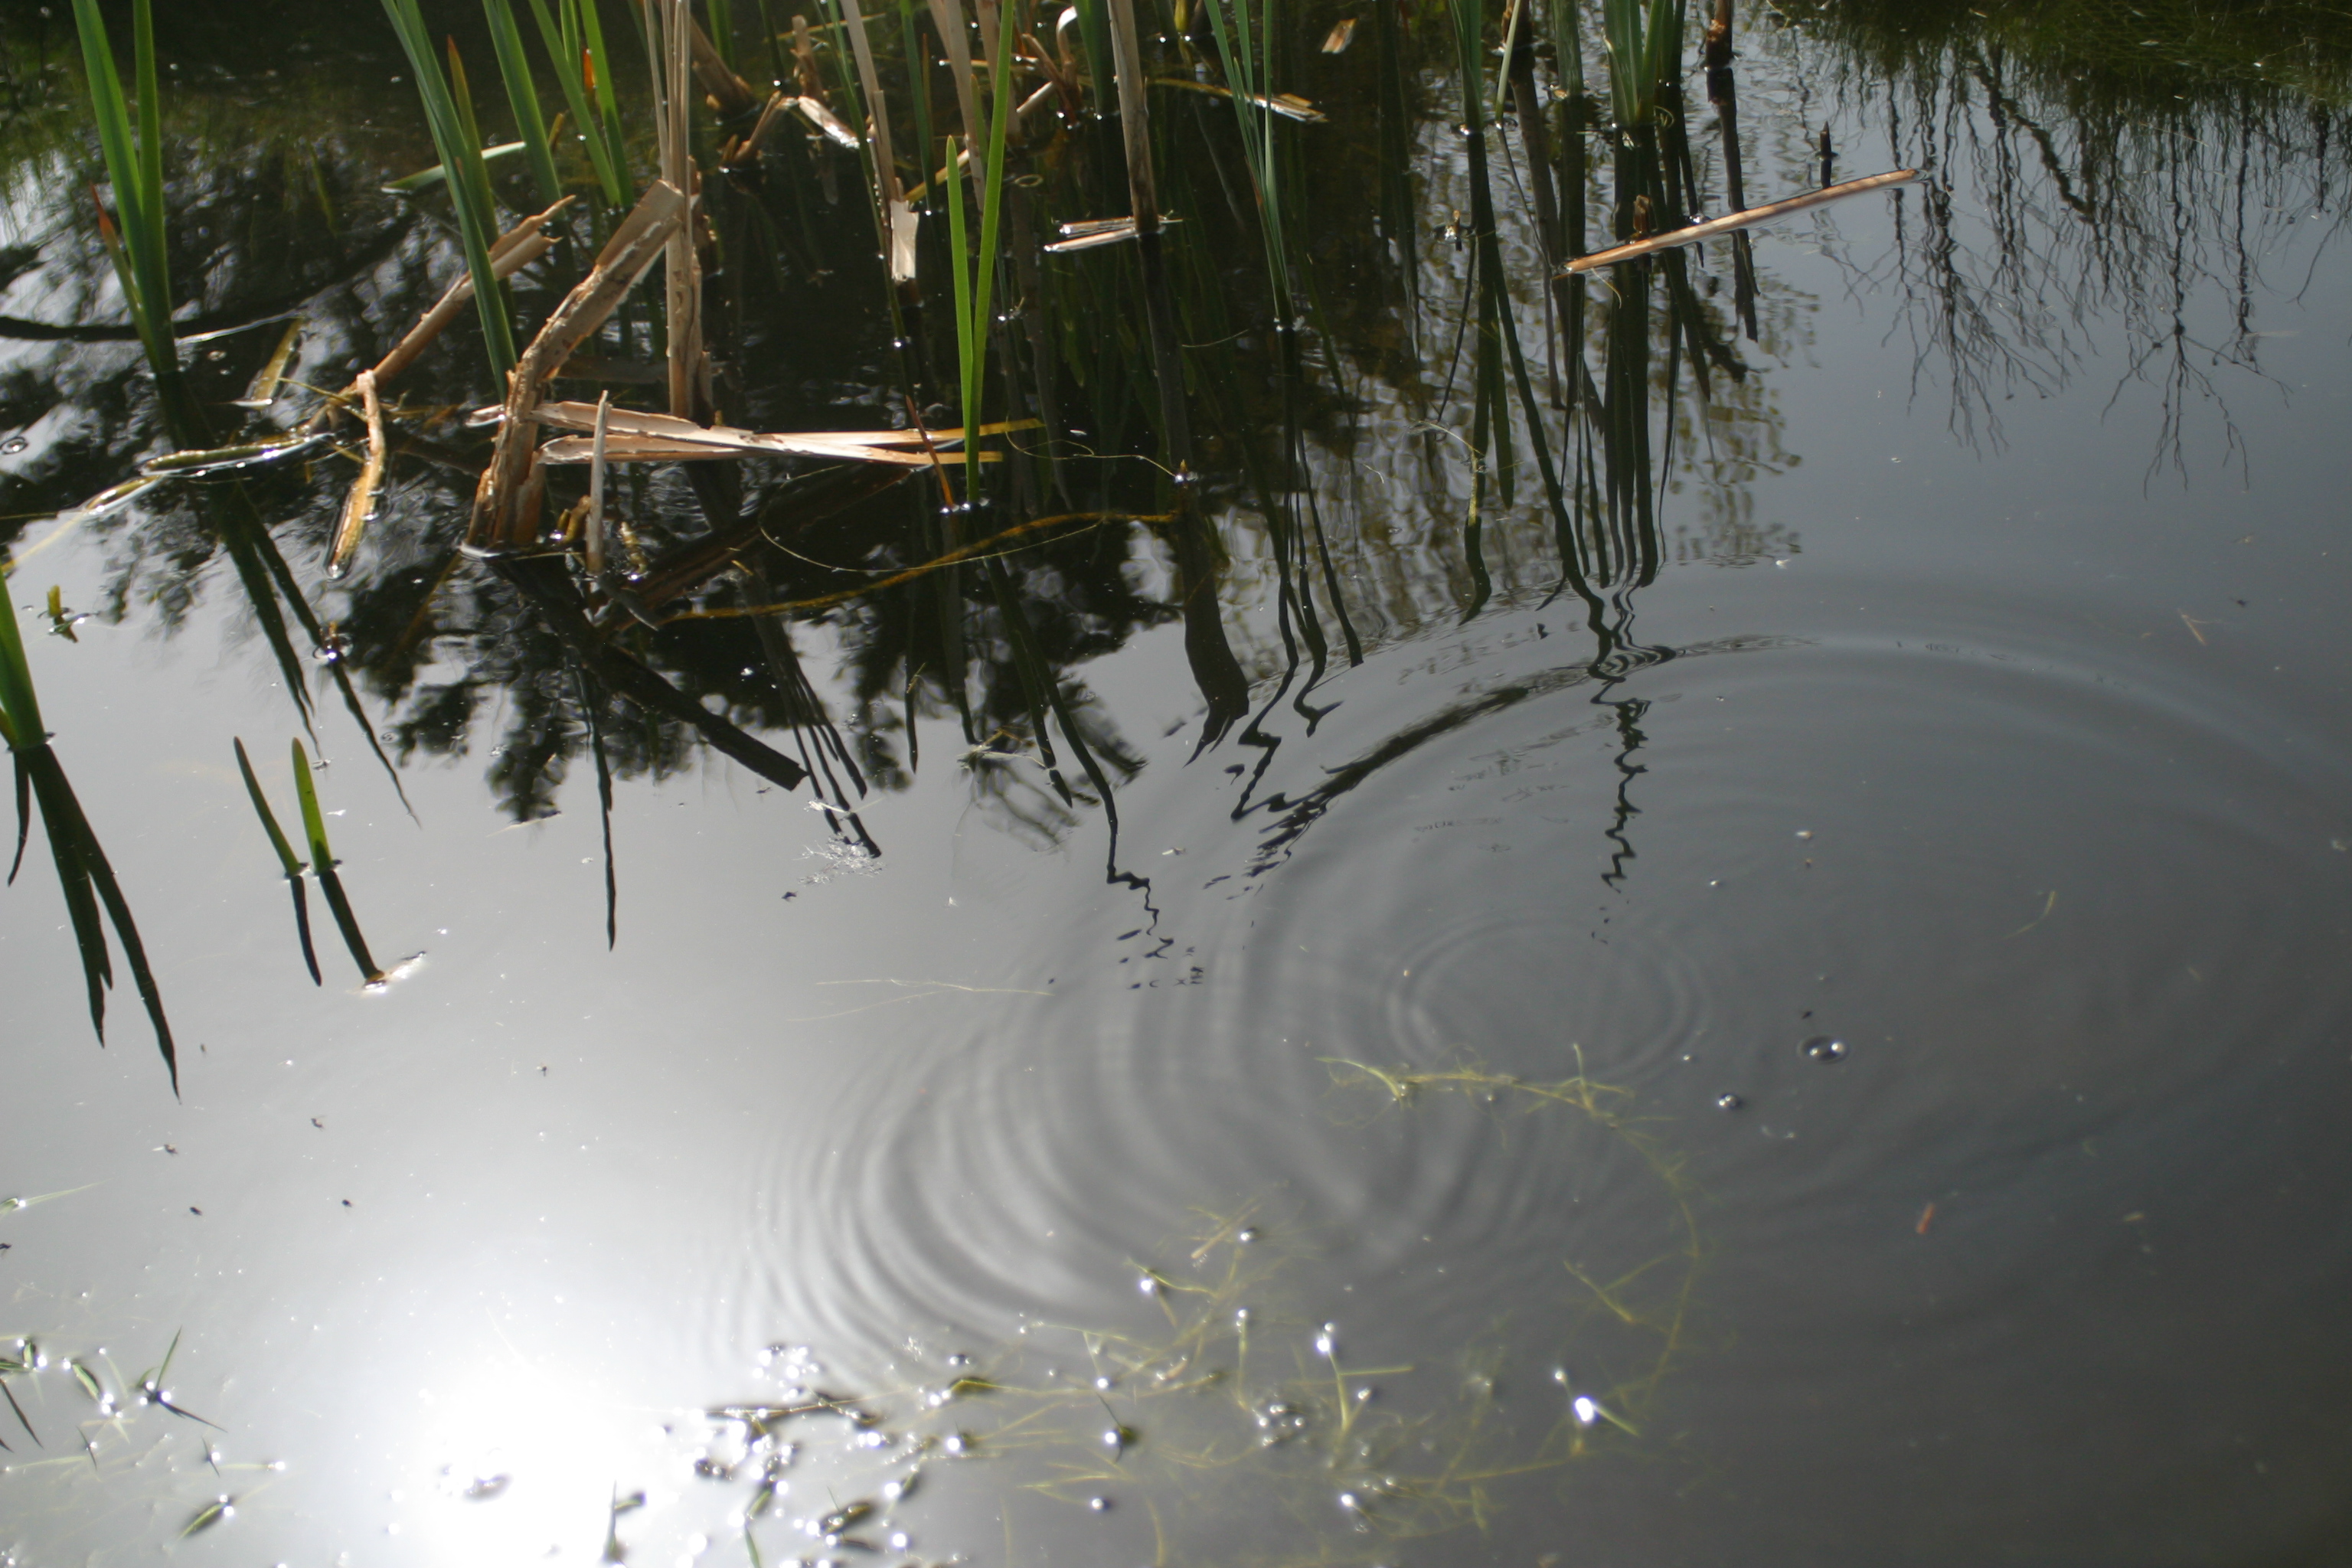 Water Insect movement on Pond